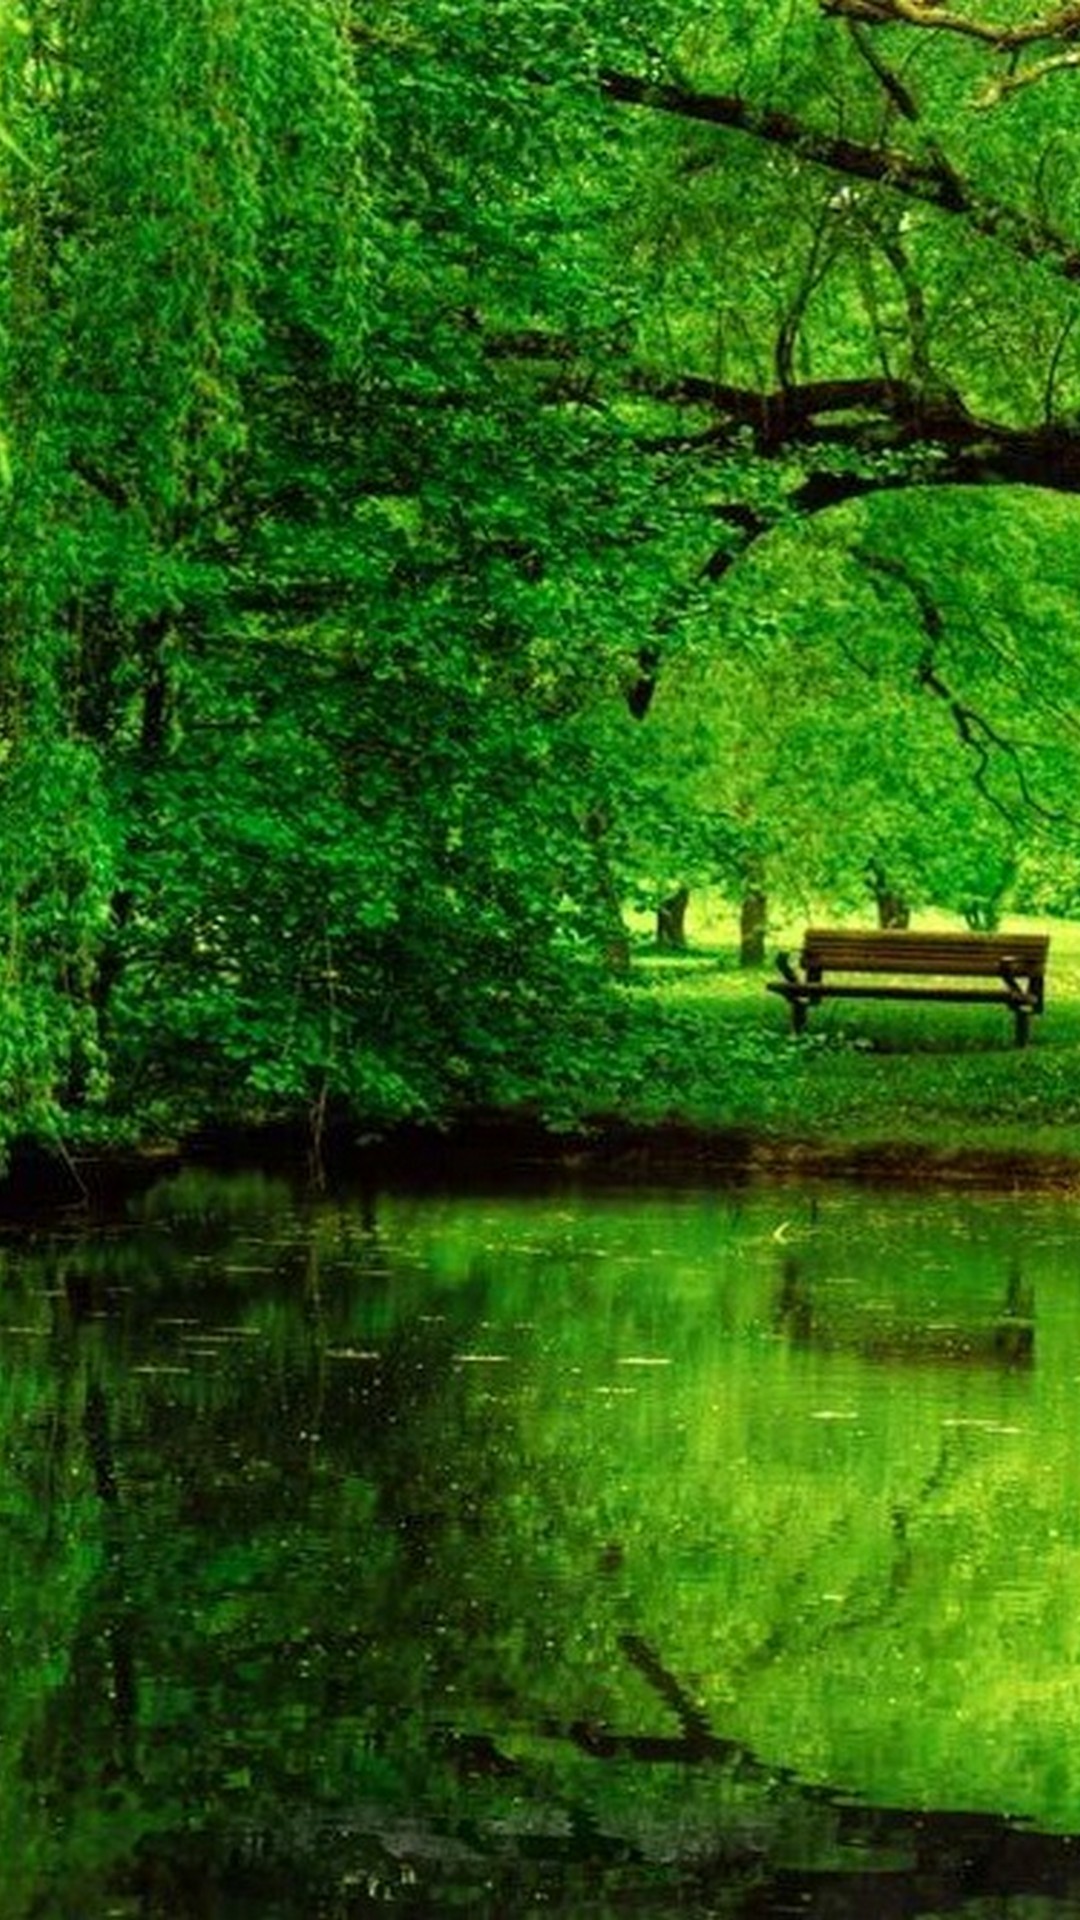 Wallpaper Nature Green Iphone With Image Resolution - Thought On Our Environment - HD Wallpaper 